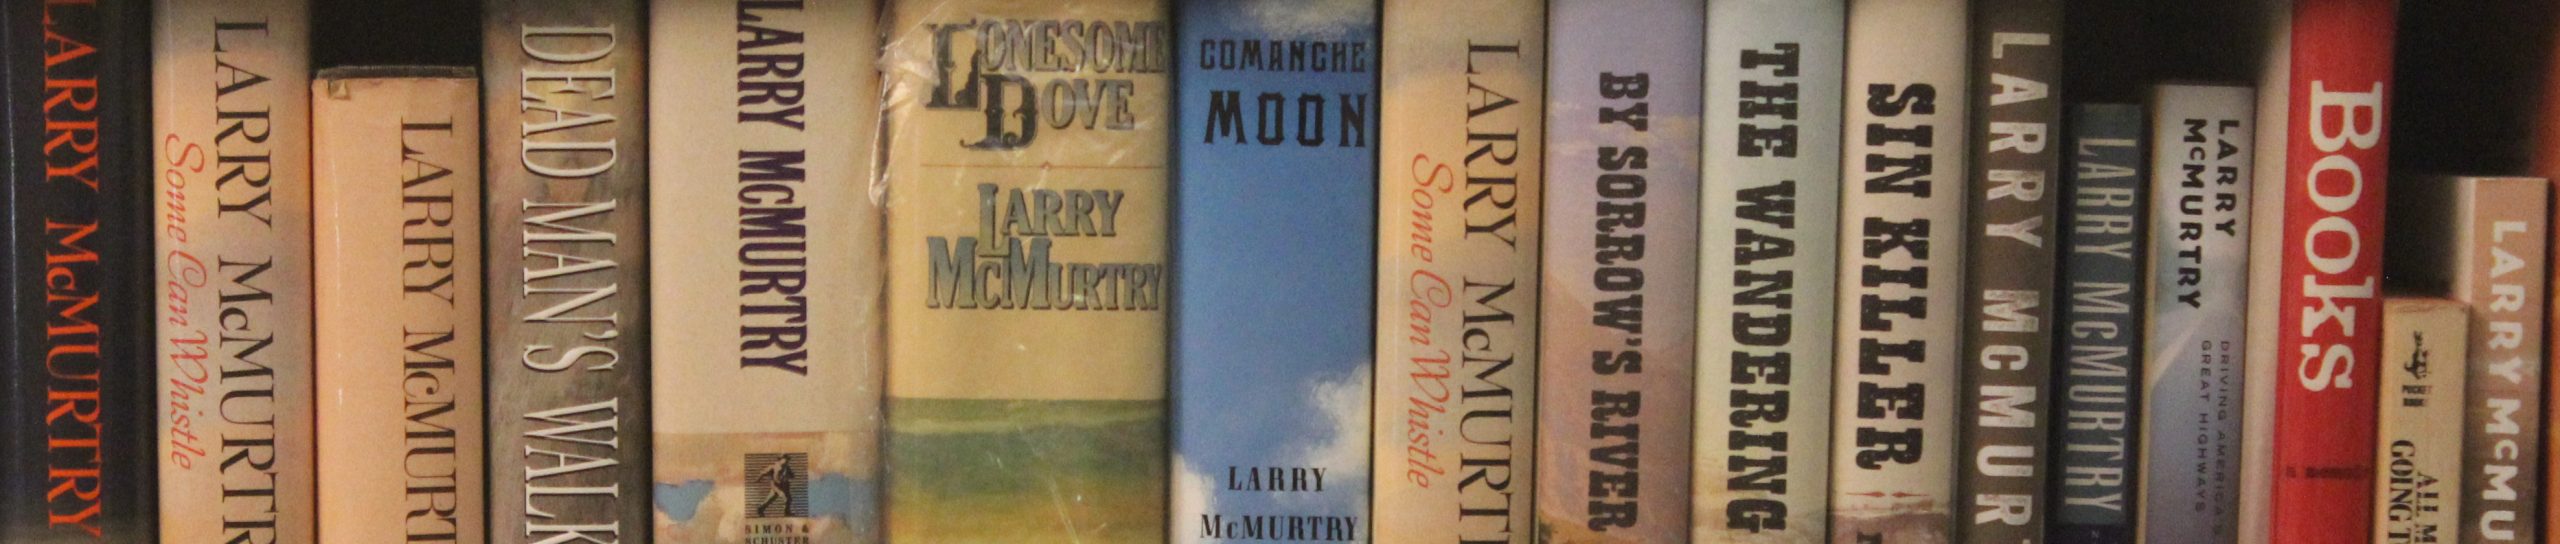 A collection of McMurtry books on a shelf